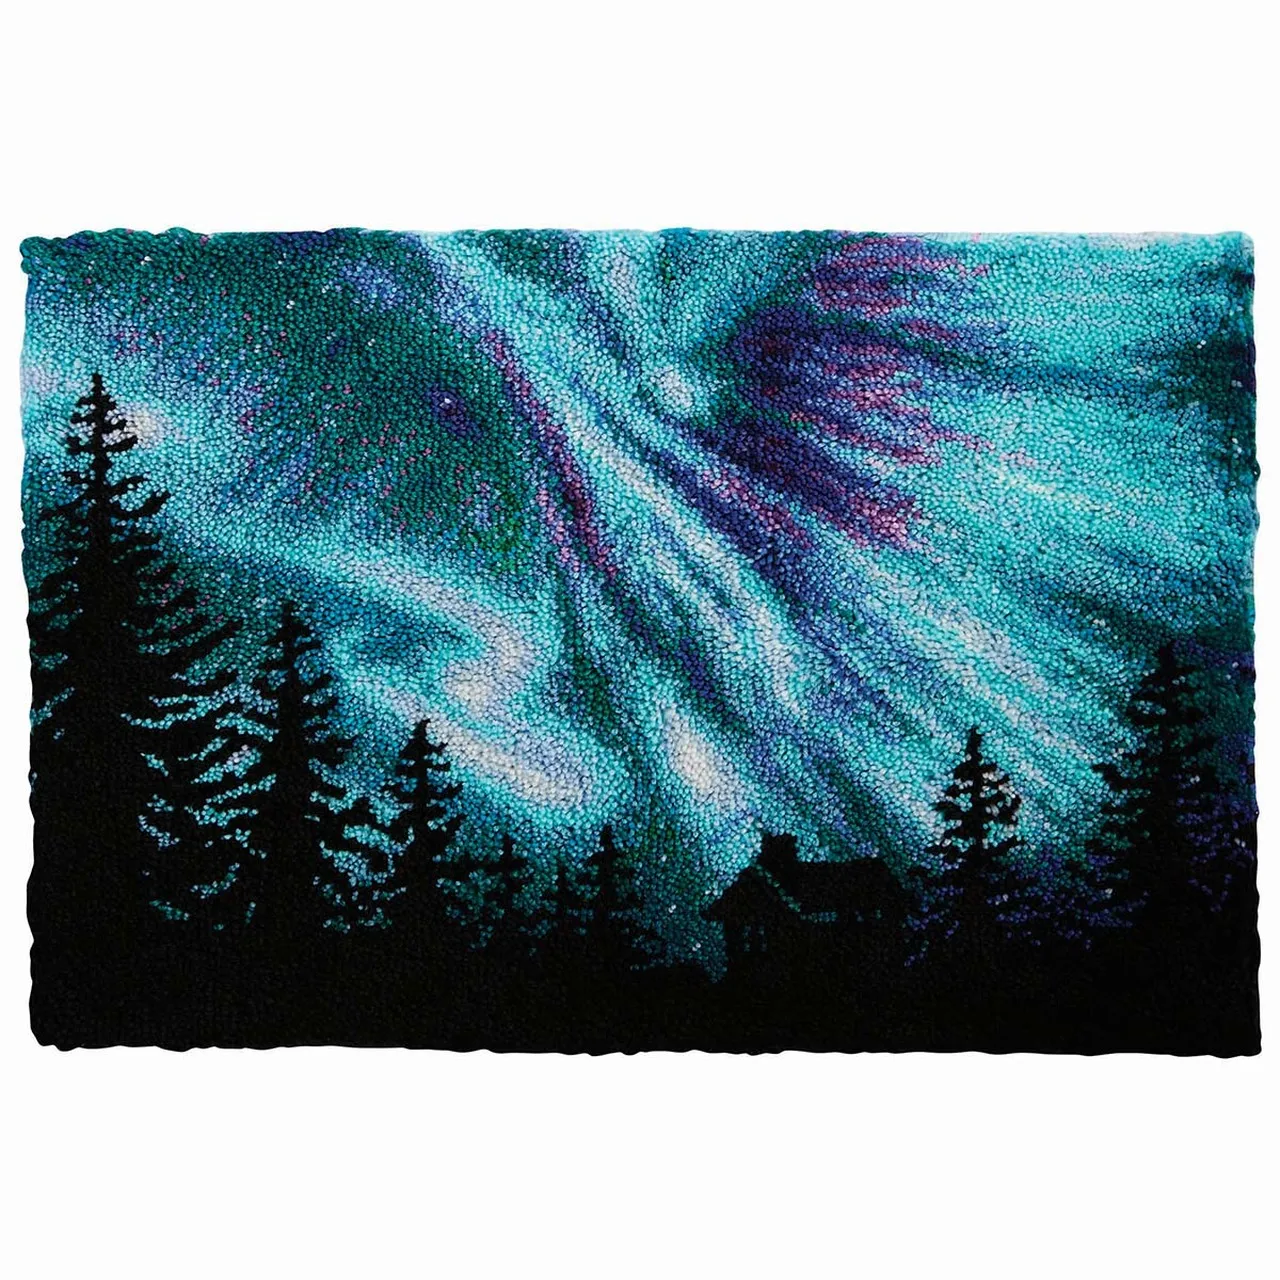 

Latch Hook Rug Kits Aurora Borealis Wall Tapestry DIY Carpet Rug Pre-Printed Canvas with Non-Skid Backing Floor Mat 102x69cm